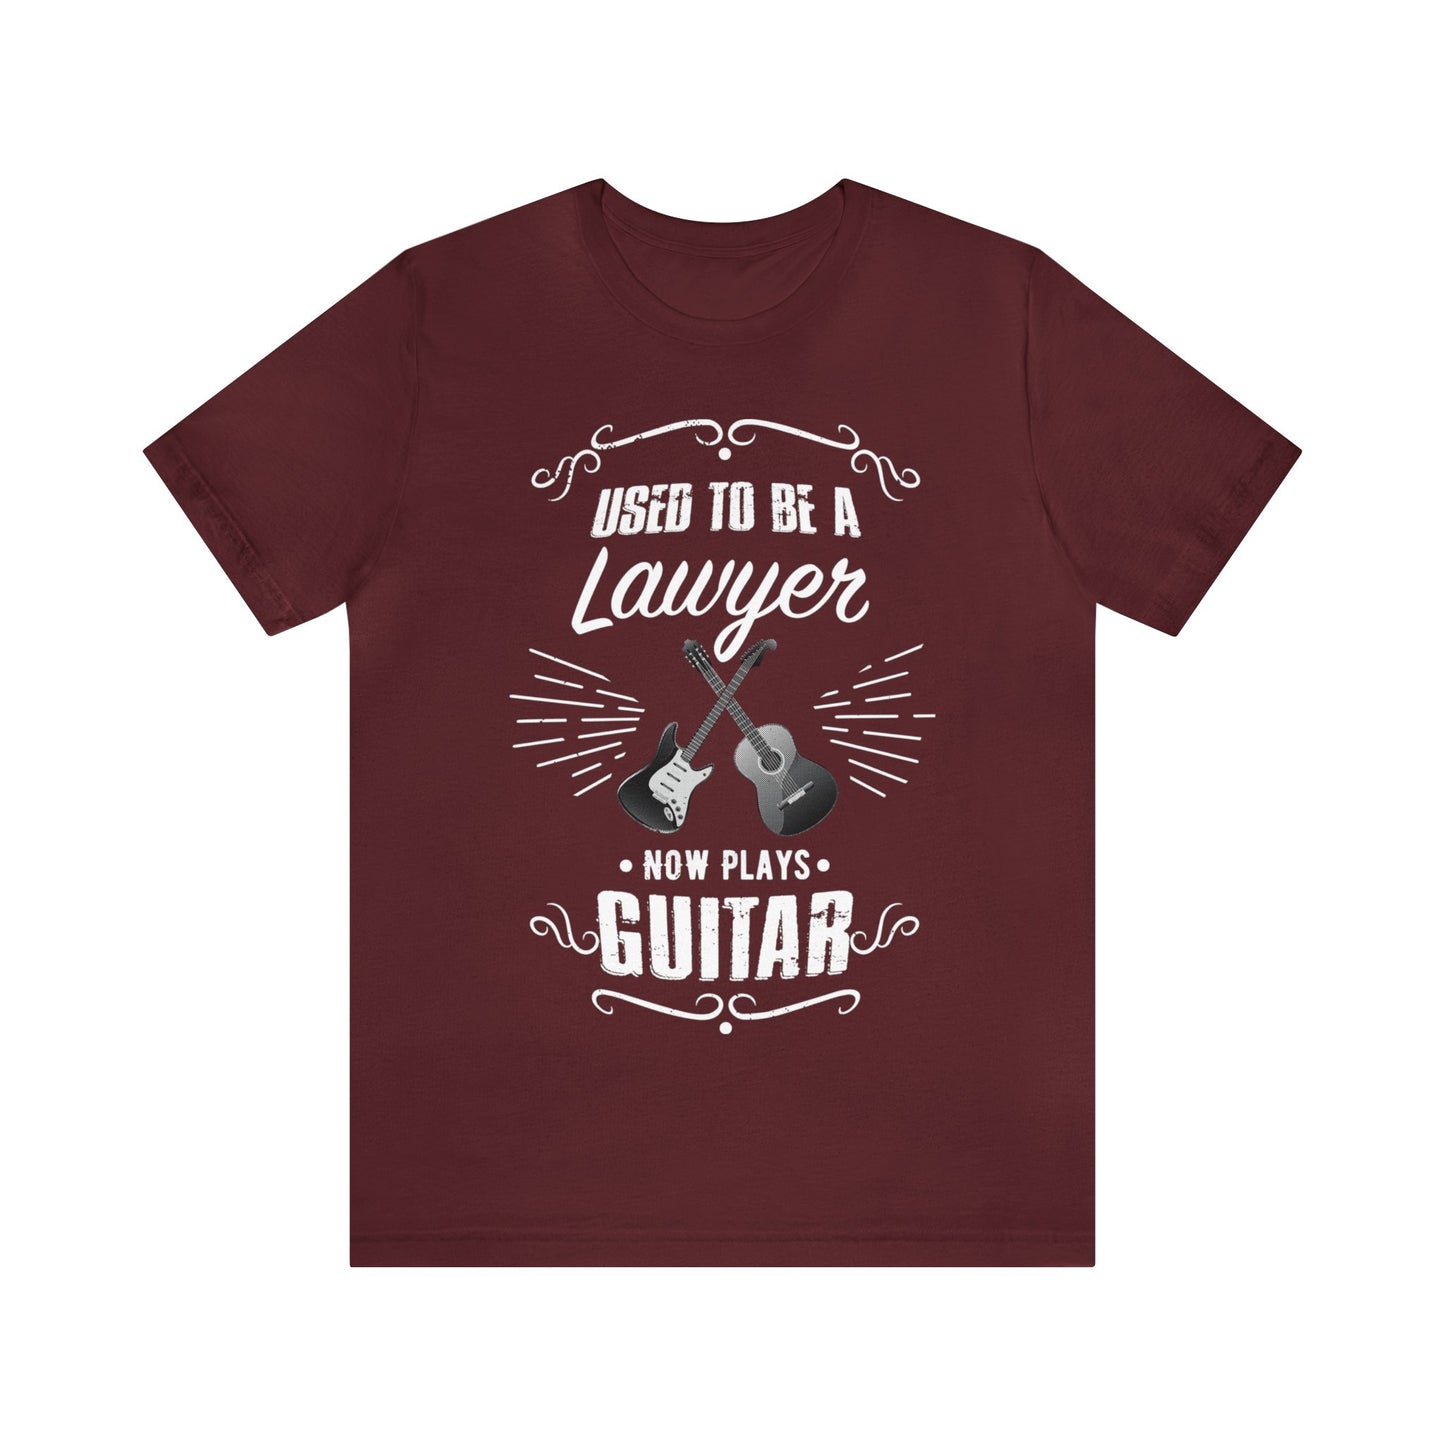 Used to be a LAWYER; Now Plays GUITAR - Retirement Gift, (lots more occupations available) Funny Unisex T-shirt, dark shirt colors, for amateur musician